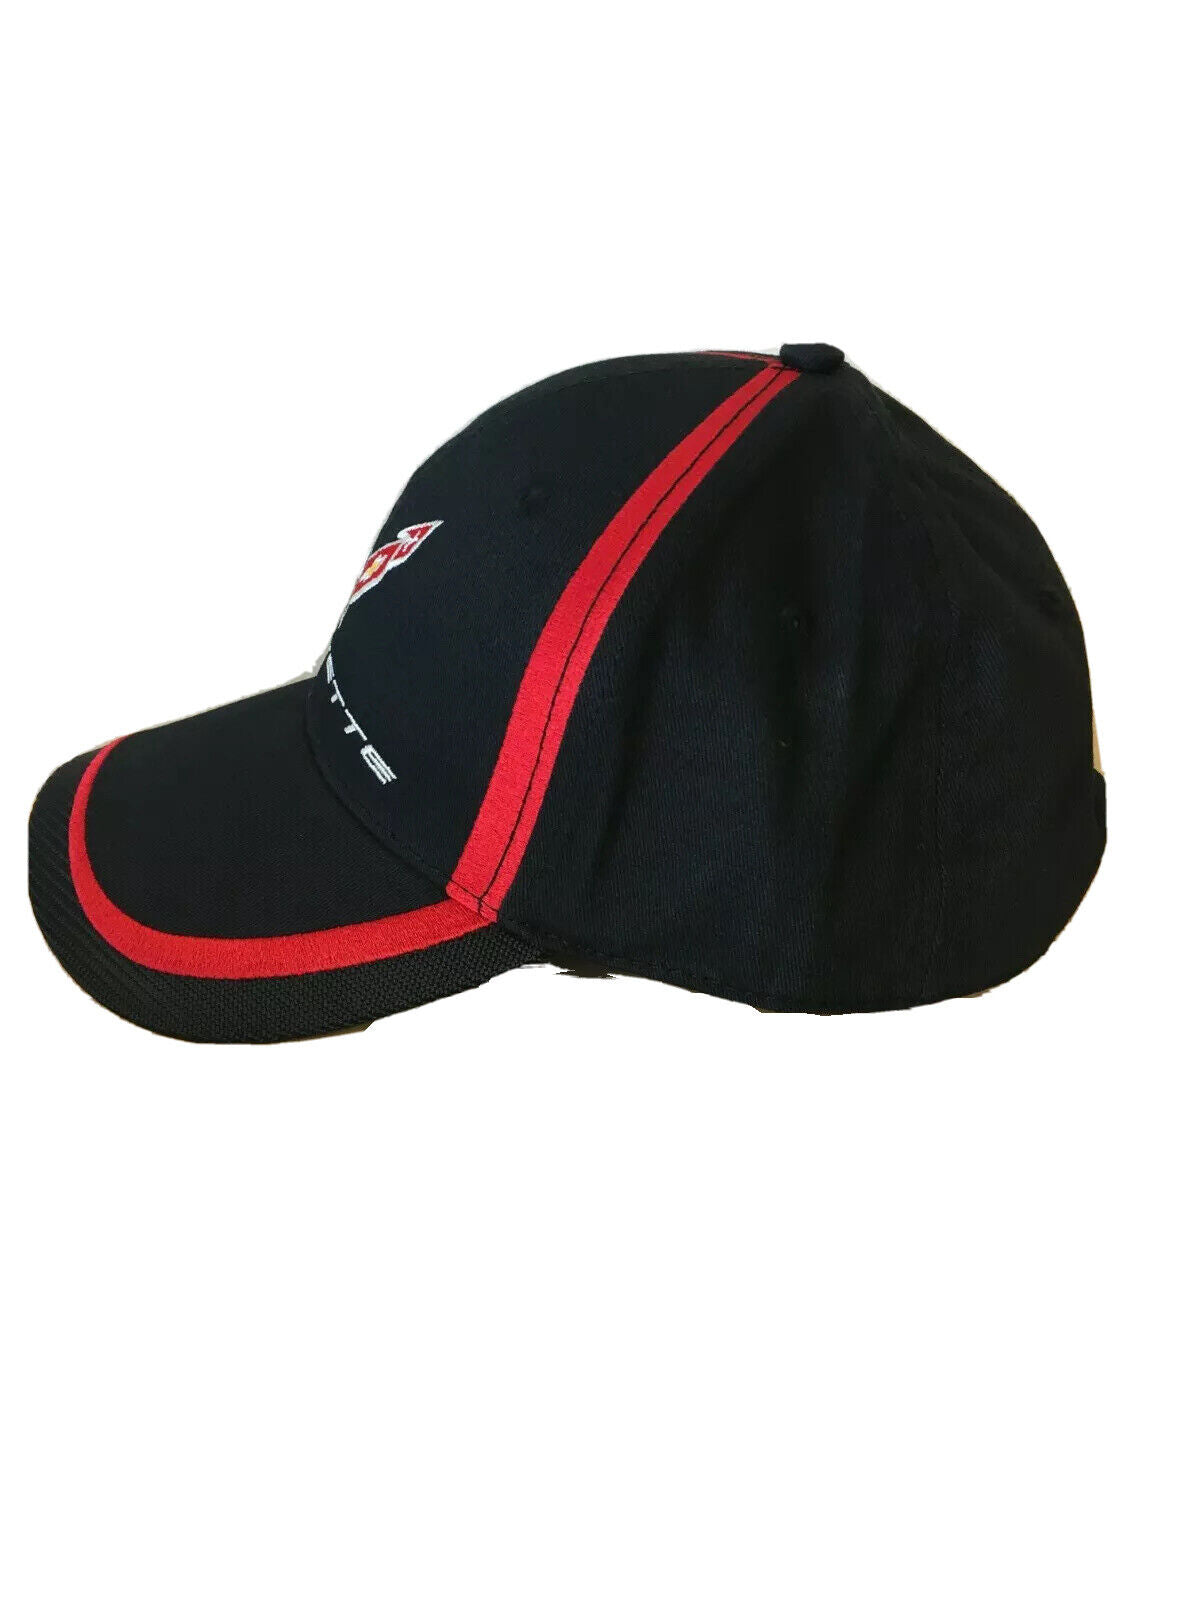 C8 Corvette Adjustable Cap Black with Red Accents Buds Chevrolet